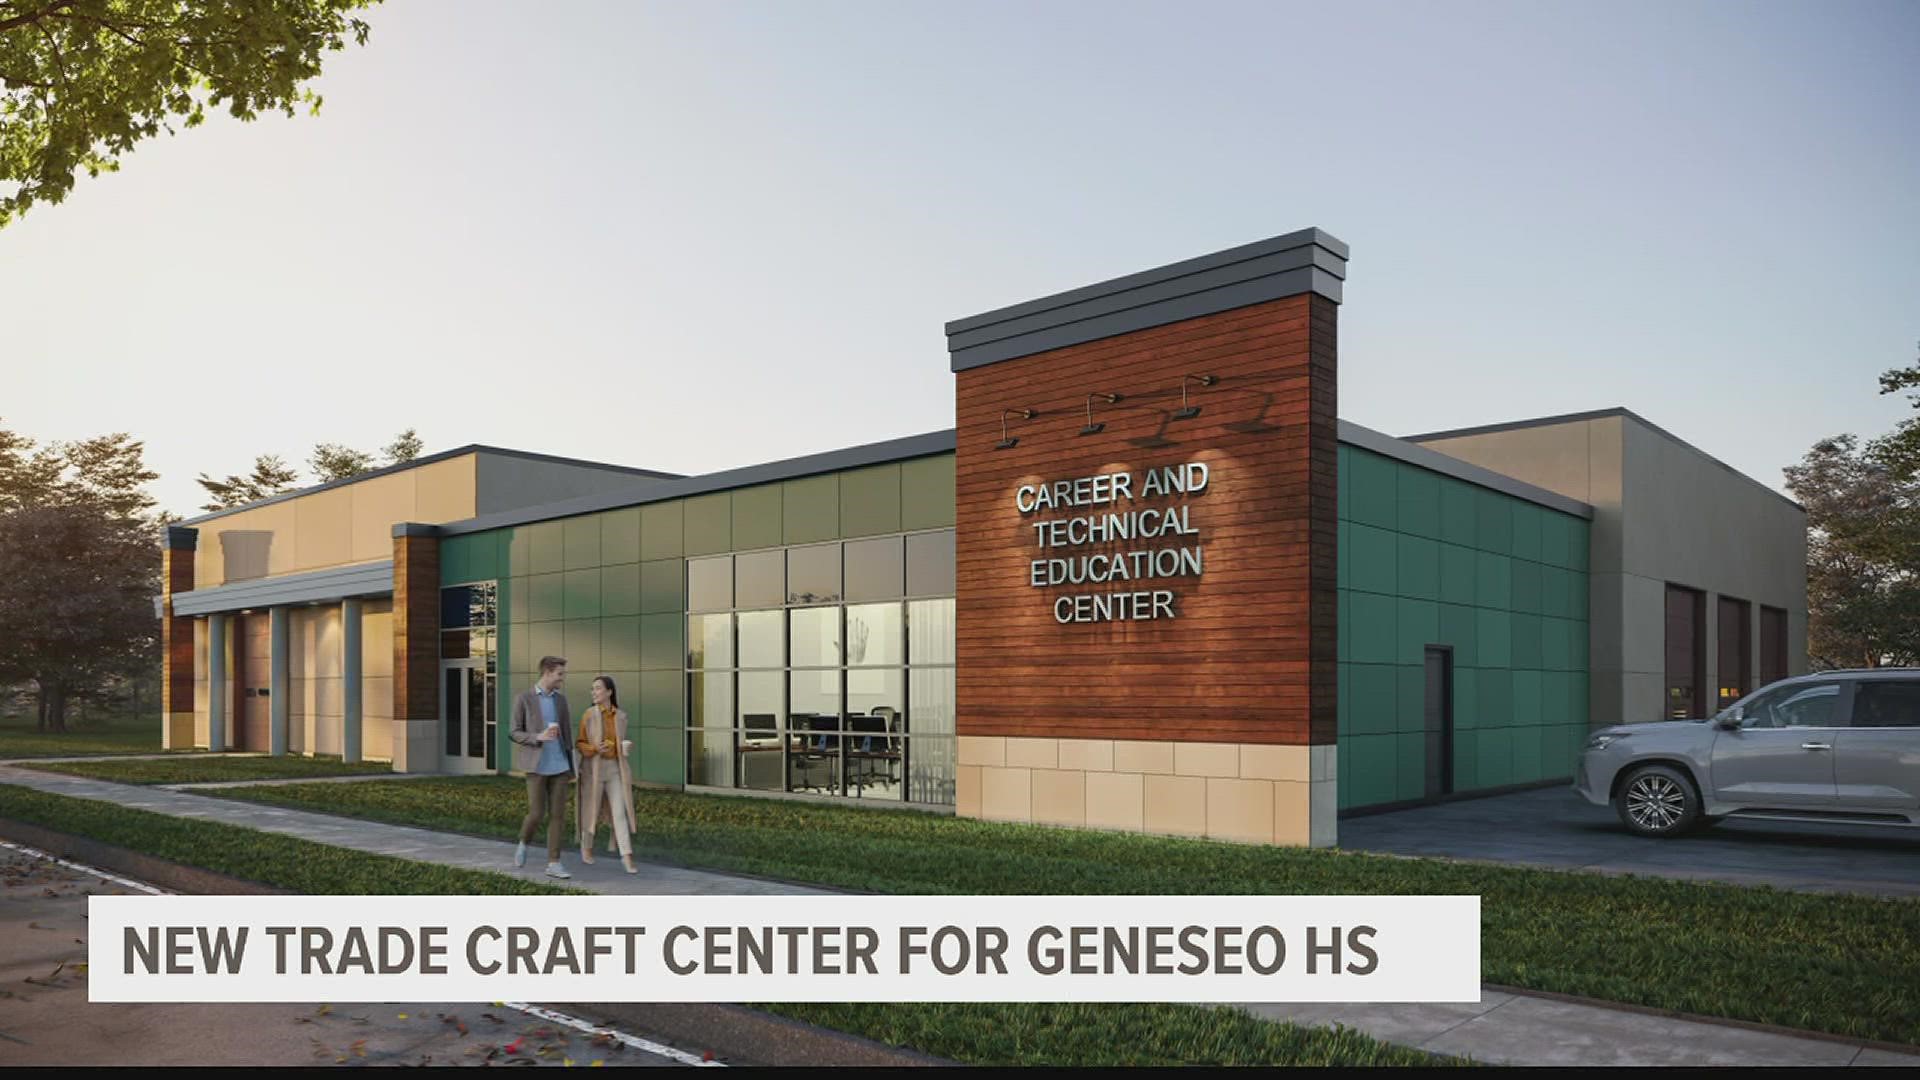 The over 10,000 sq. ft. facility is planned to host classes starting in Fall 2023.